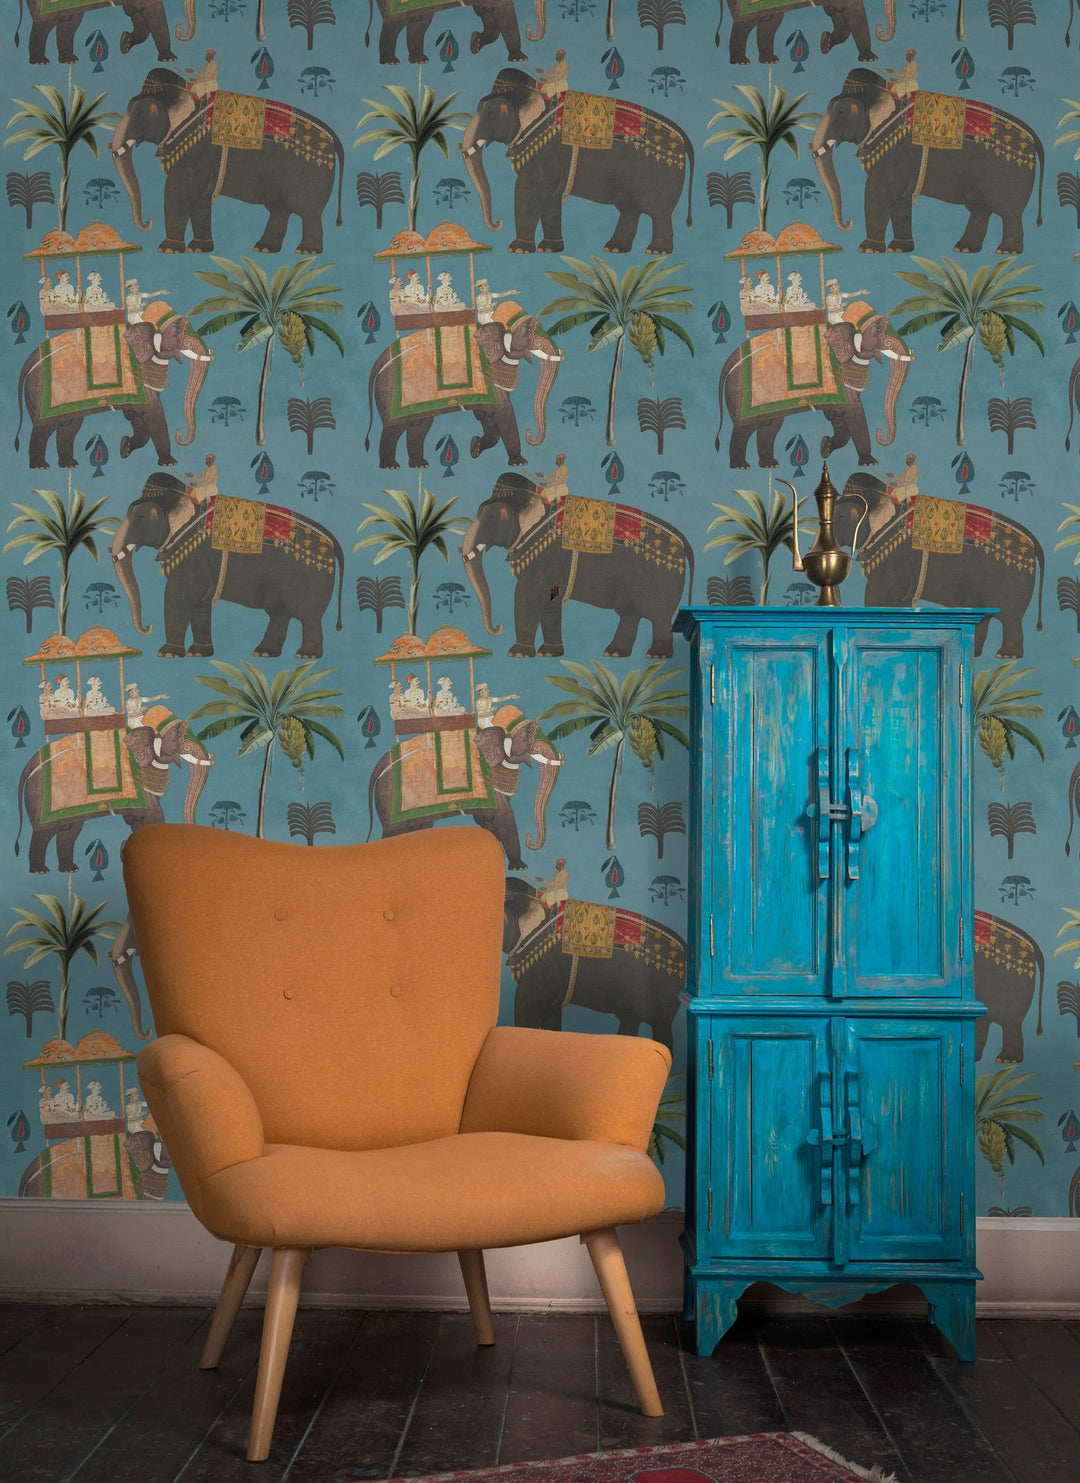 mind-the-gap-the-procession-blue-wallpaper-the-mysterious-traveller-collection-blue-background-elephants-indian-culture-travelling-interior